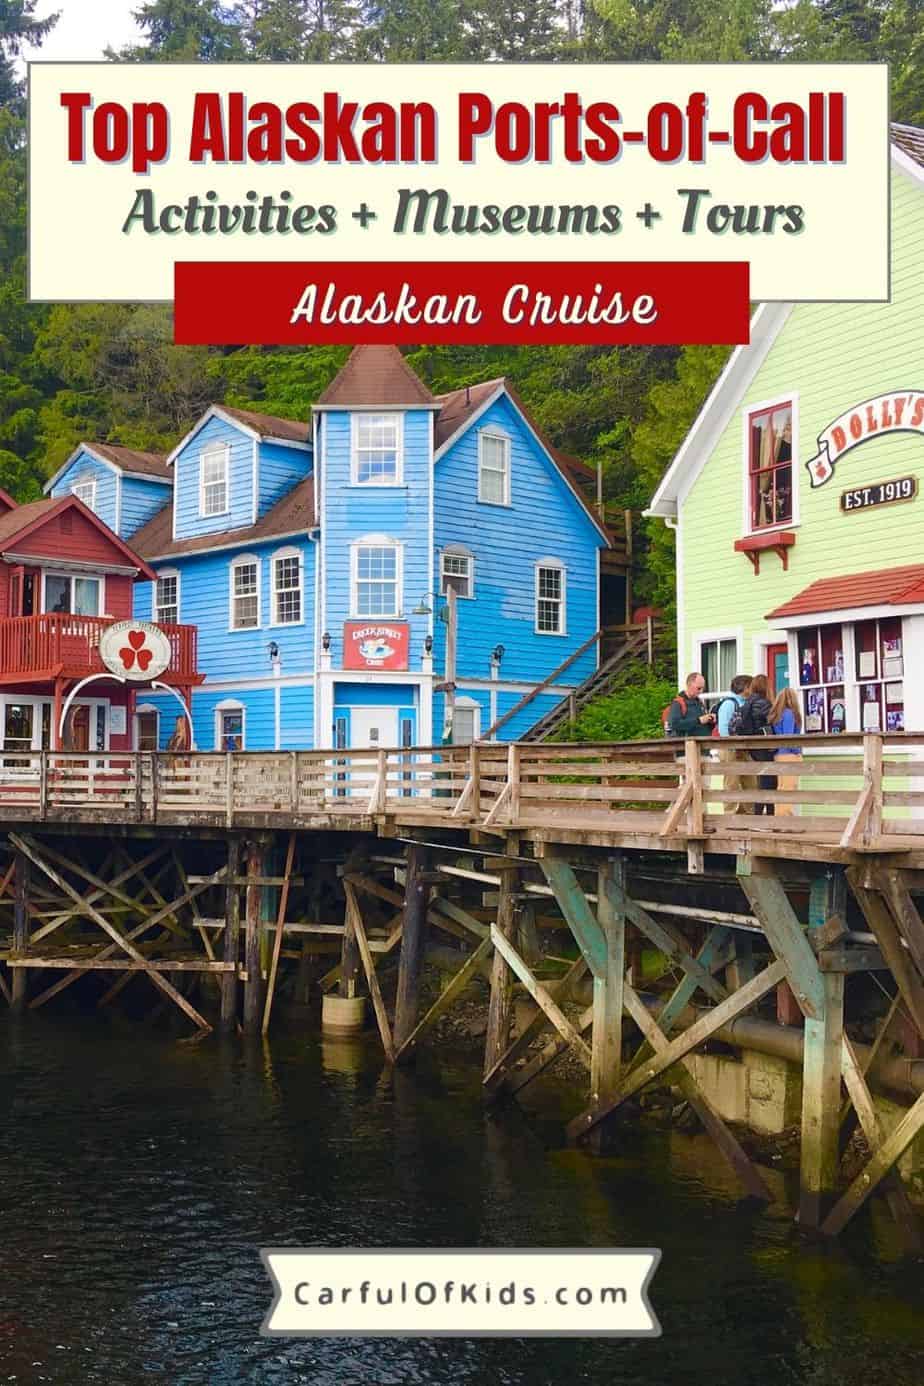 If an Alaskan cruise is on your bucket list, which ports-of-call do you want to visit. Each cruise offers a different line-up of ports-of-call. Here's the top Alaskan ports-of-call along with top activities and excursions for each. What is the best Alaskan ports-of-call | Where do Alaskan cruises stop #Alaska #cruising 